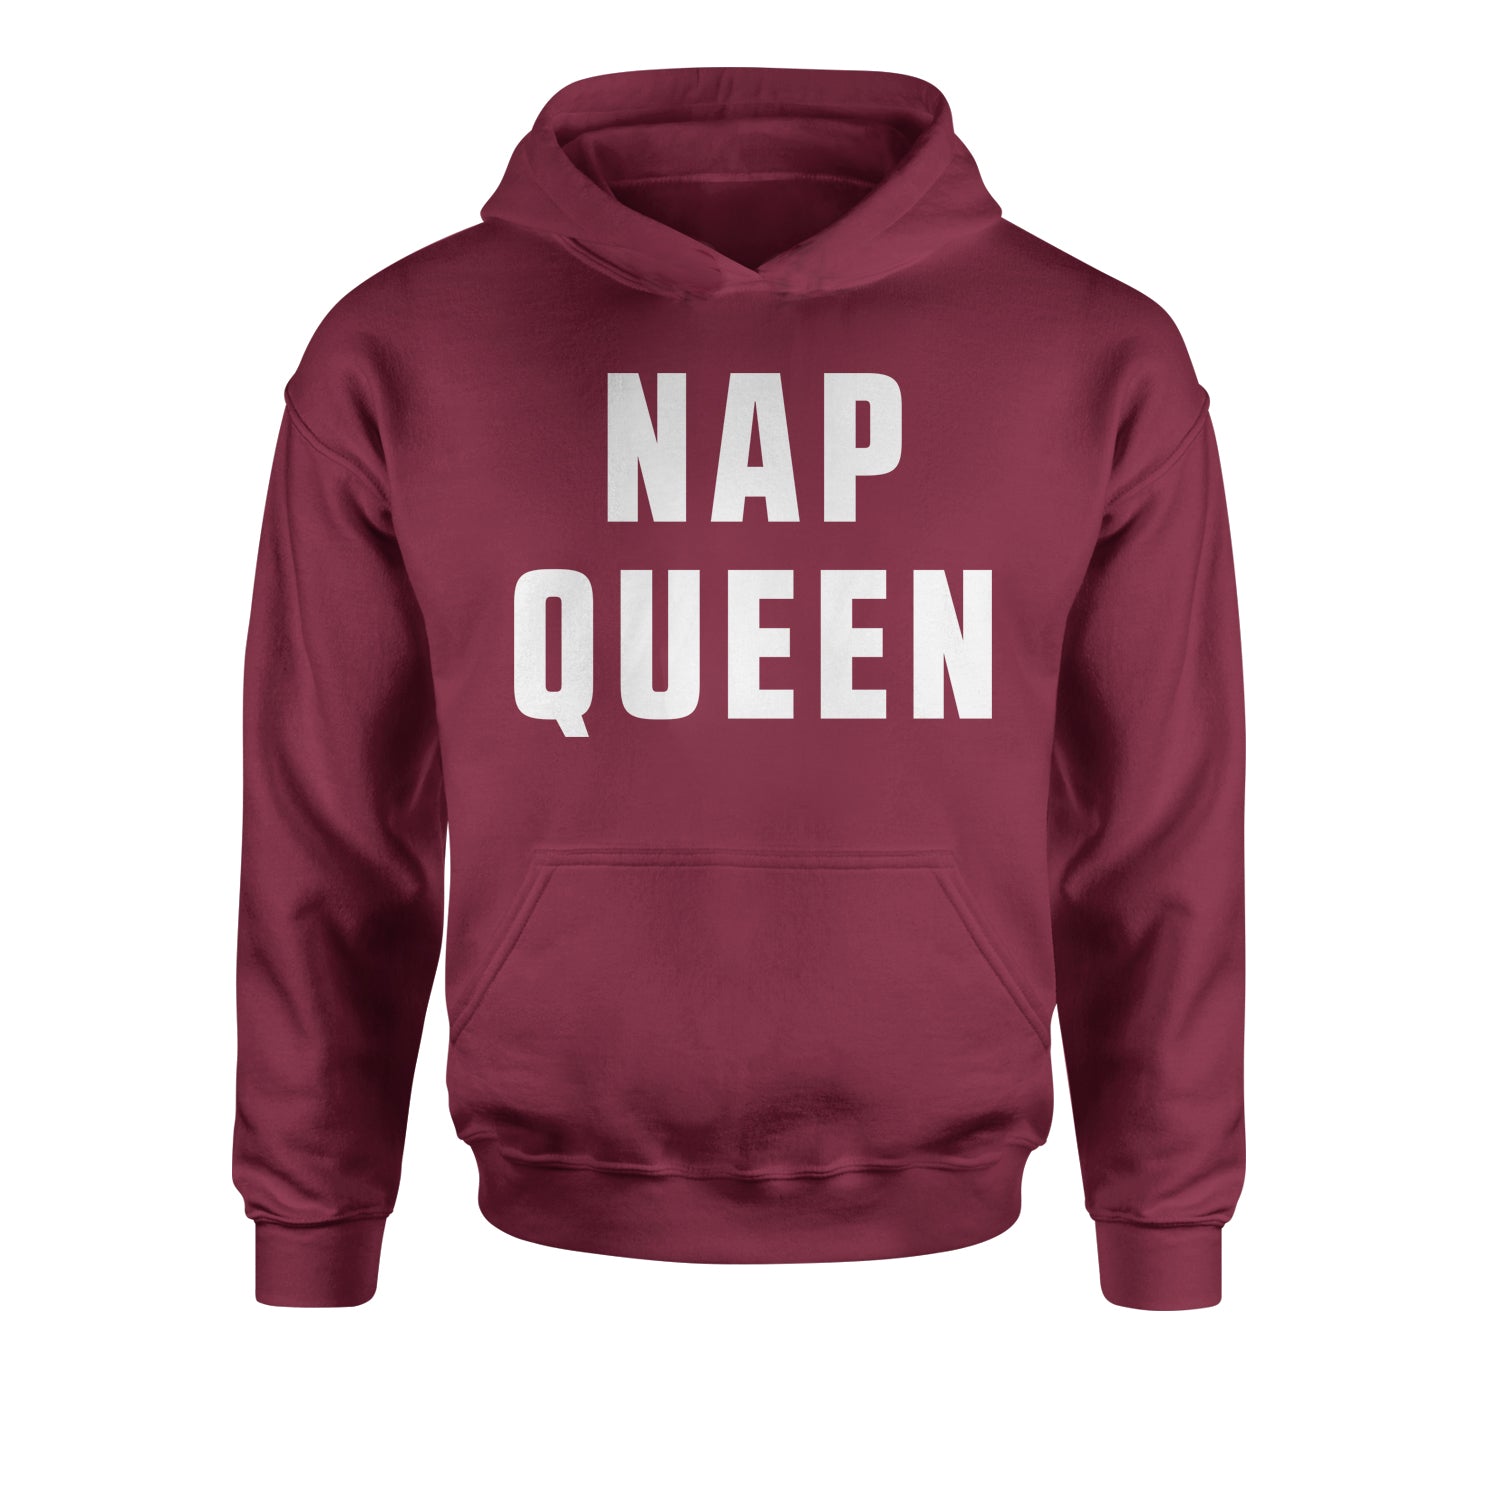 Nap Queen (White Print) Comfy Top For Lazy Days Youth-Sized Hoodie all, day, function, lazy, nap, pajamas, queen, siesta, sleep, tired, to, too by Expression Tees